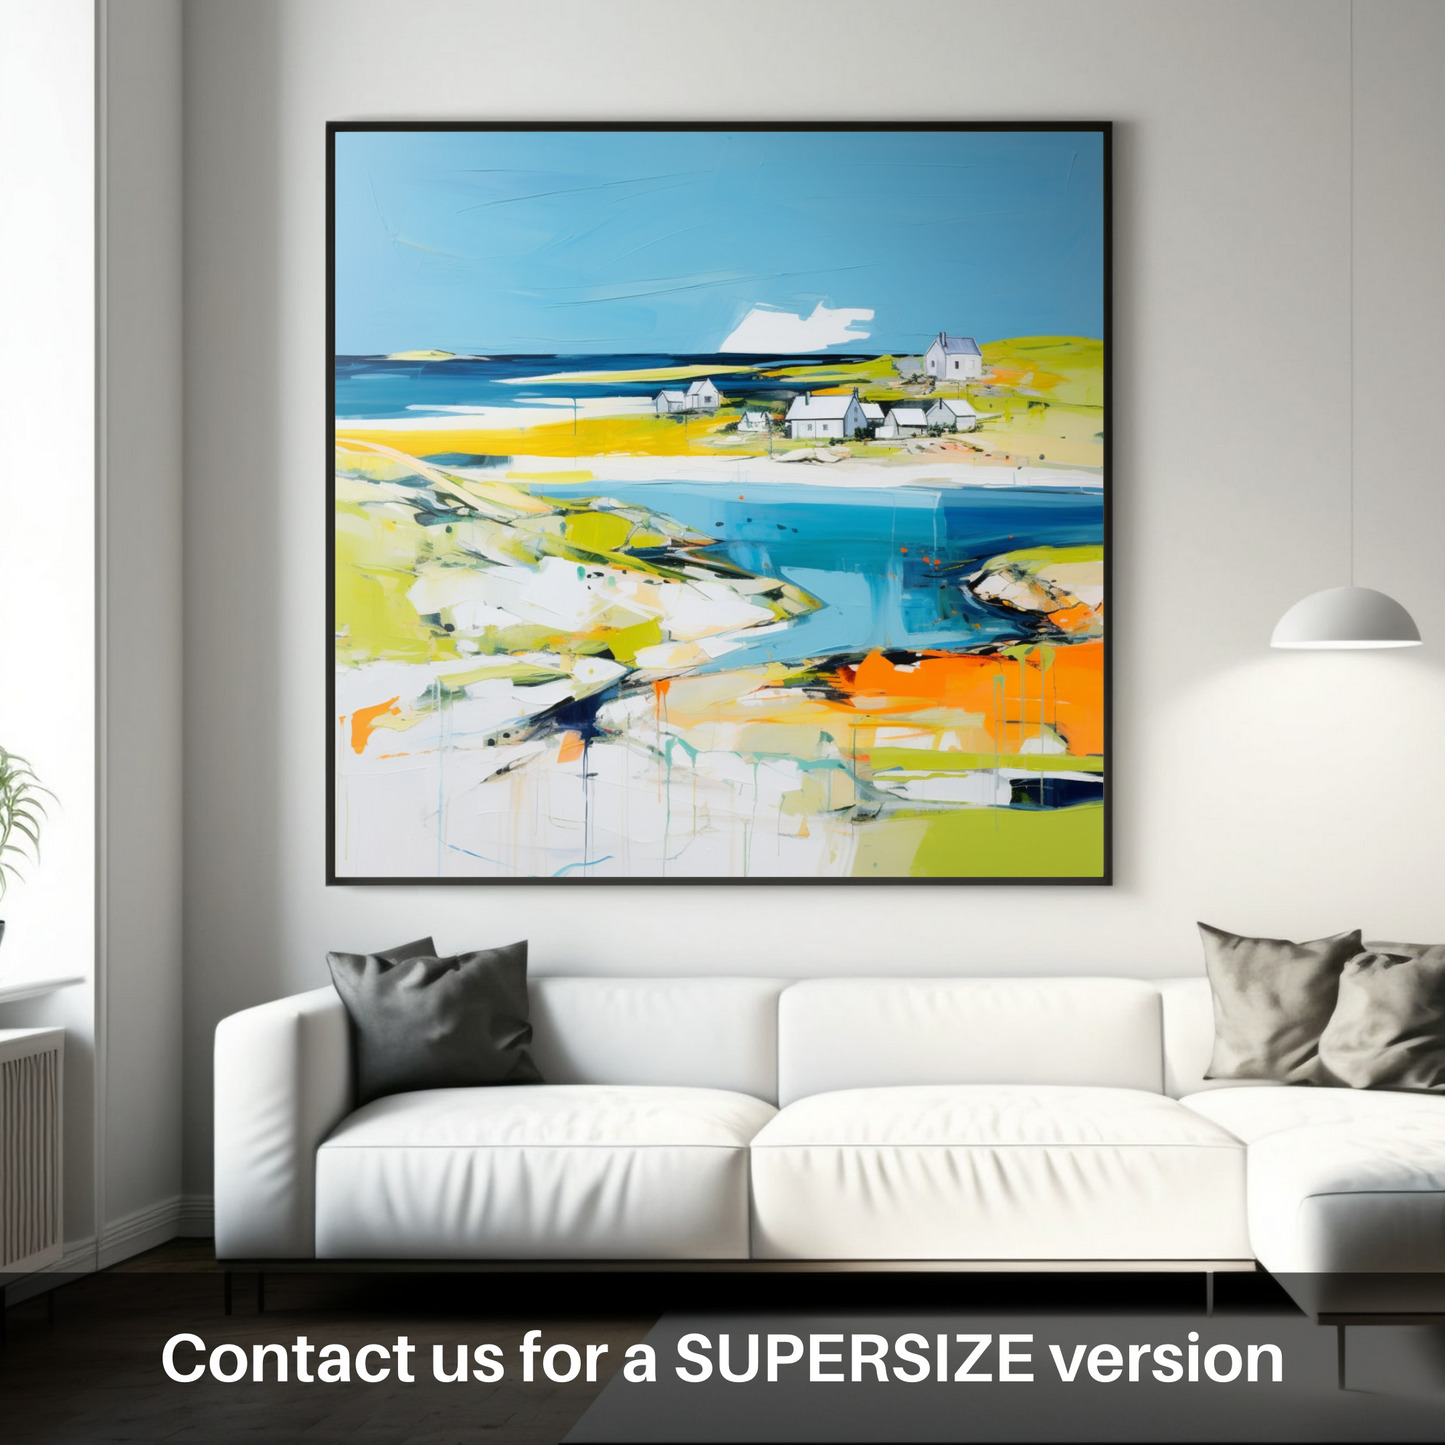 Painting and Art Print of Achmelvich Bay, Sutherland in summer. Achmelvich Bay Summer Bliss.